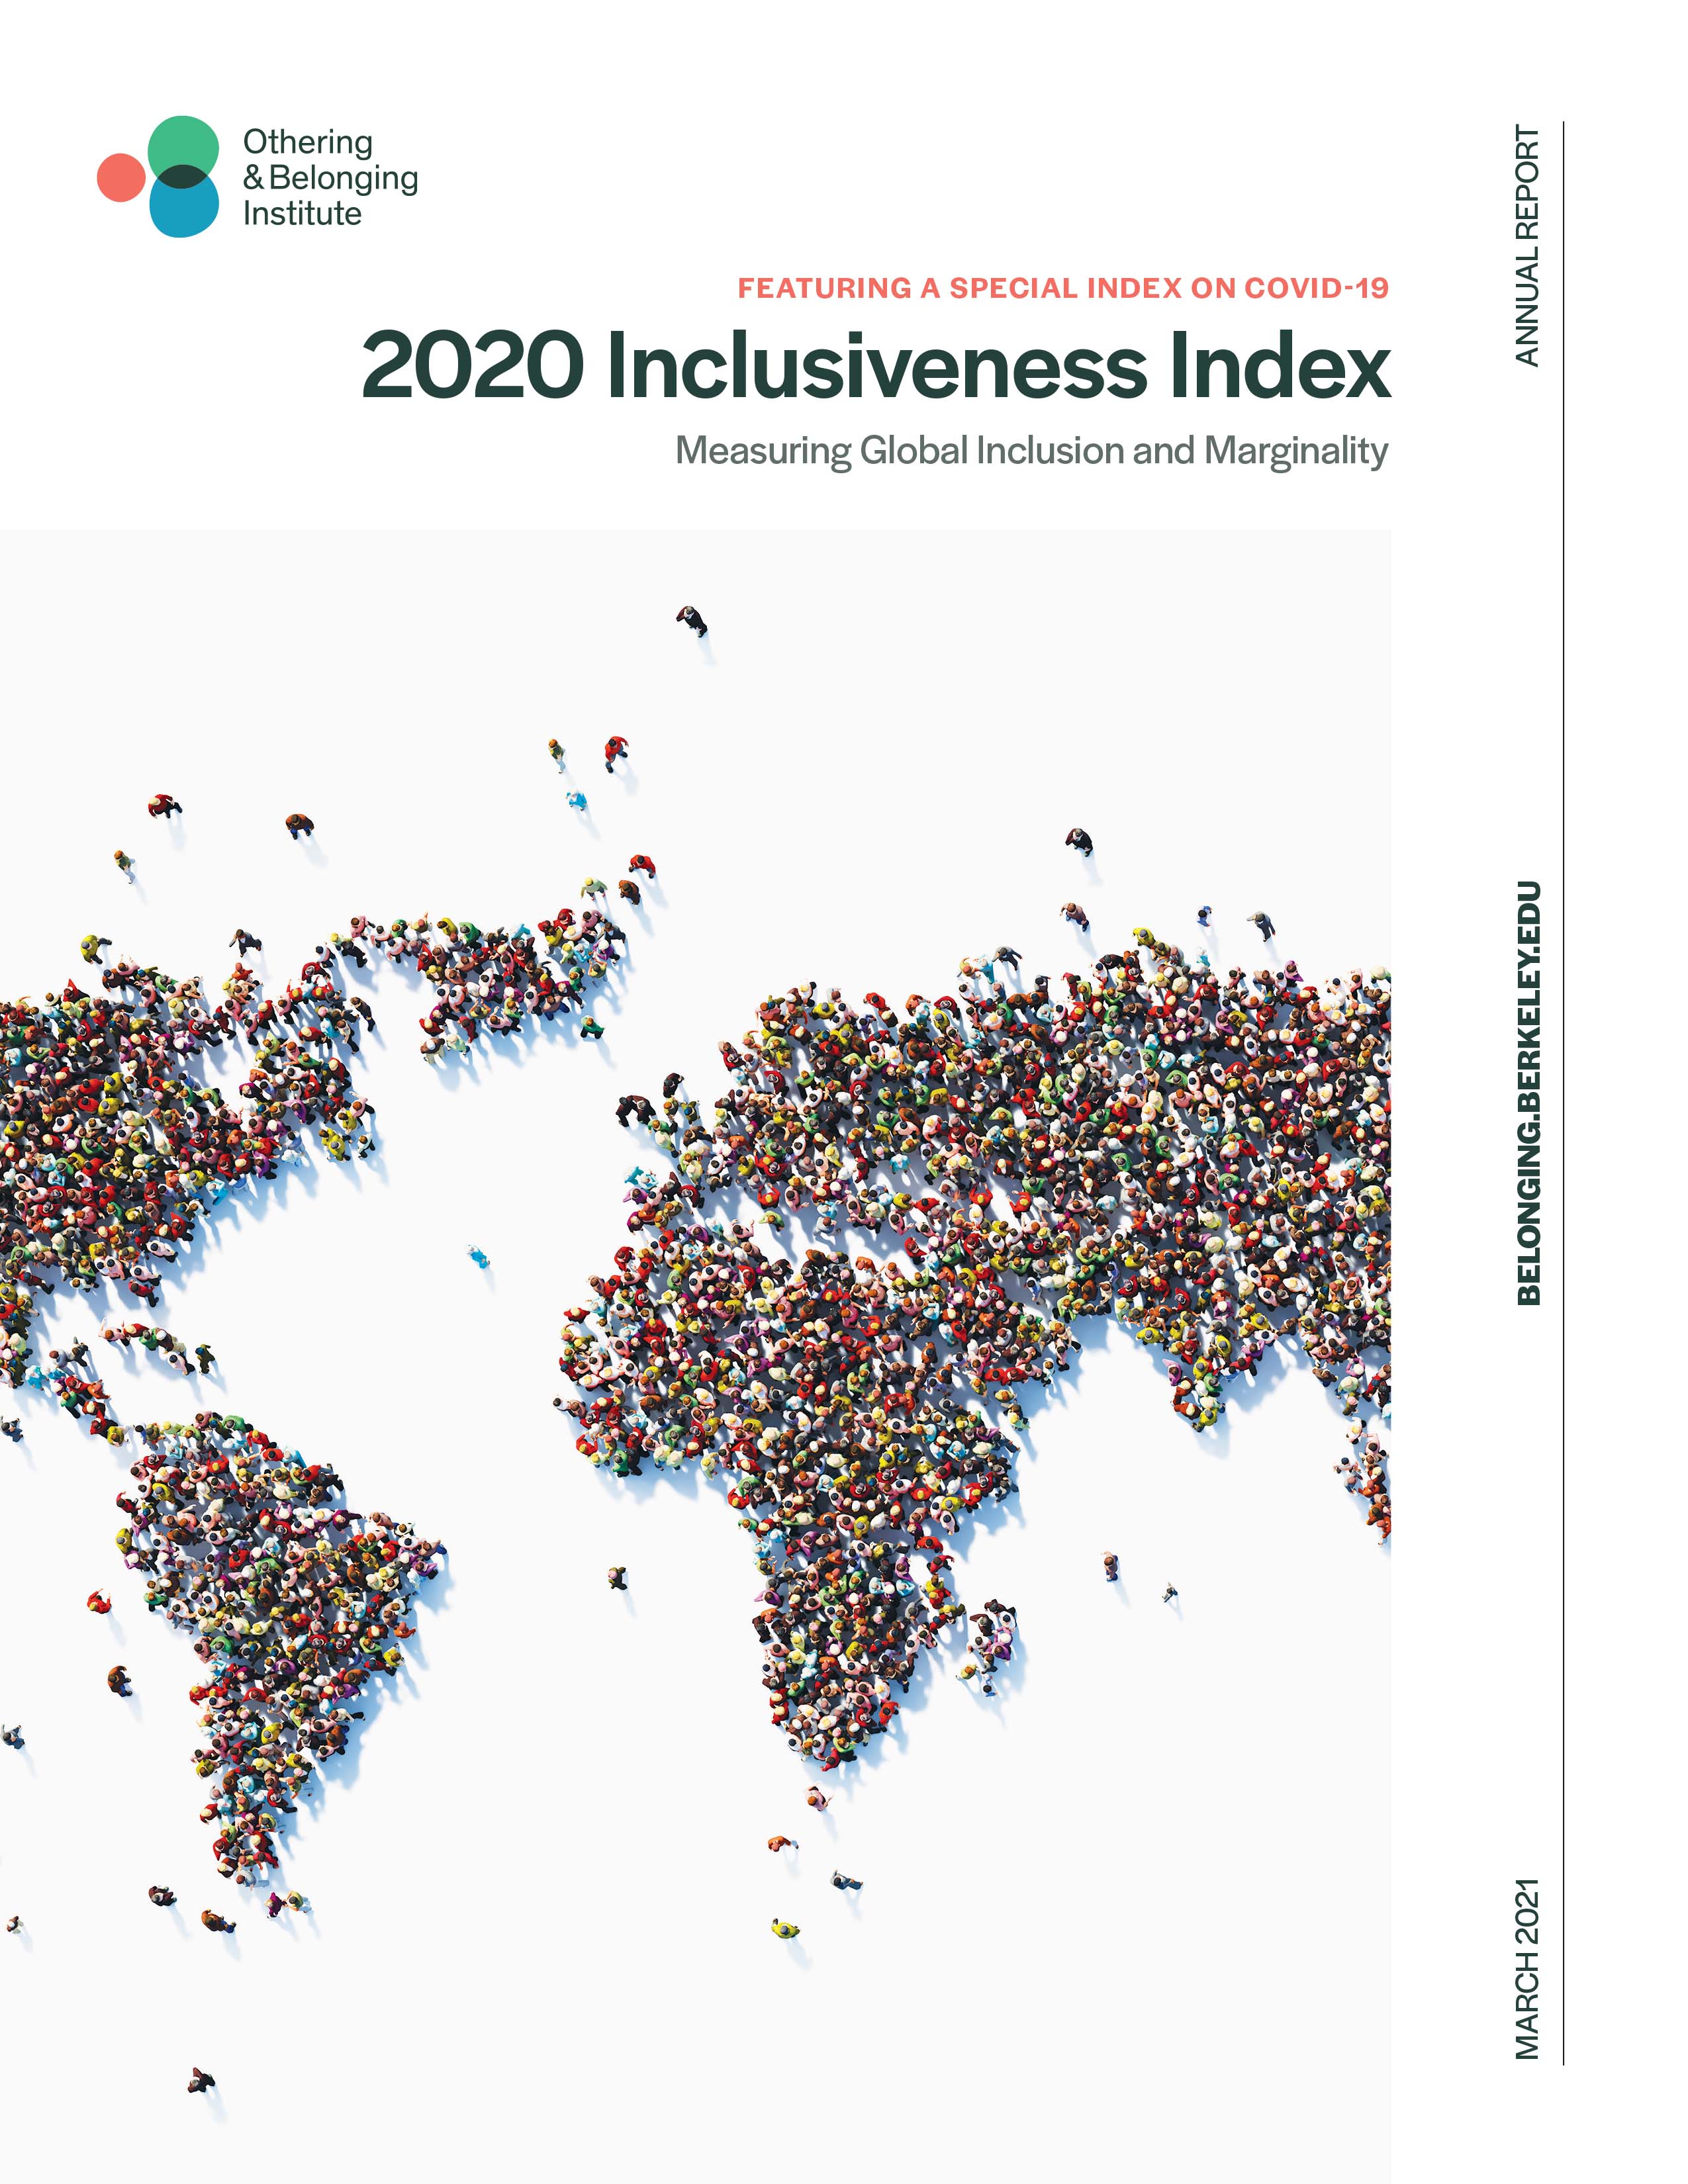 cover of the inclusiveness index report; masses of people form a map of the earth